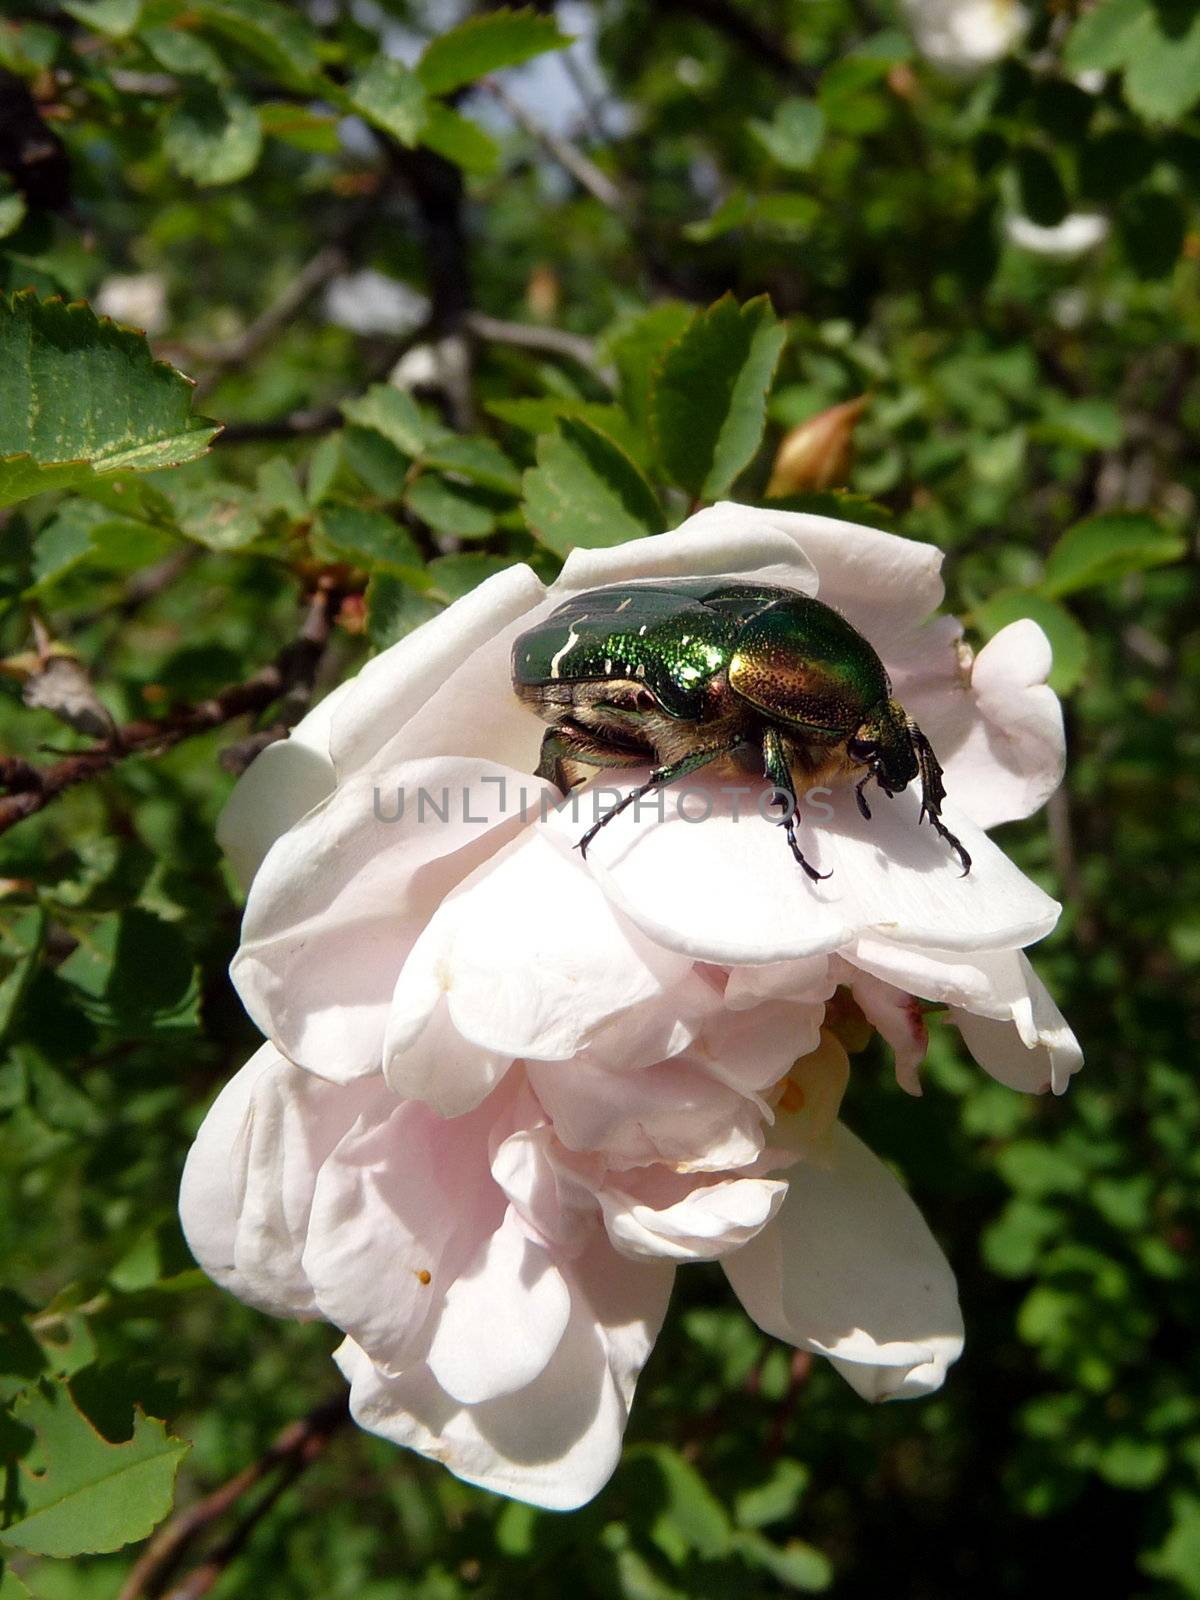 Beetle on white flower by tomatto